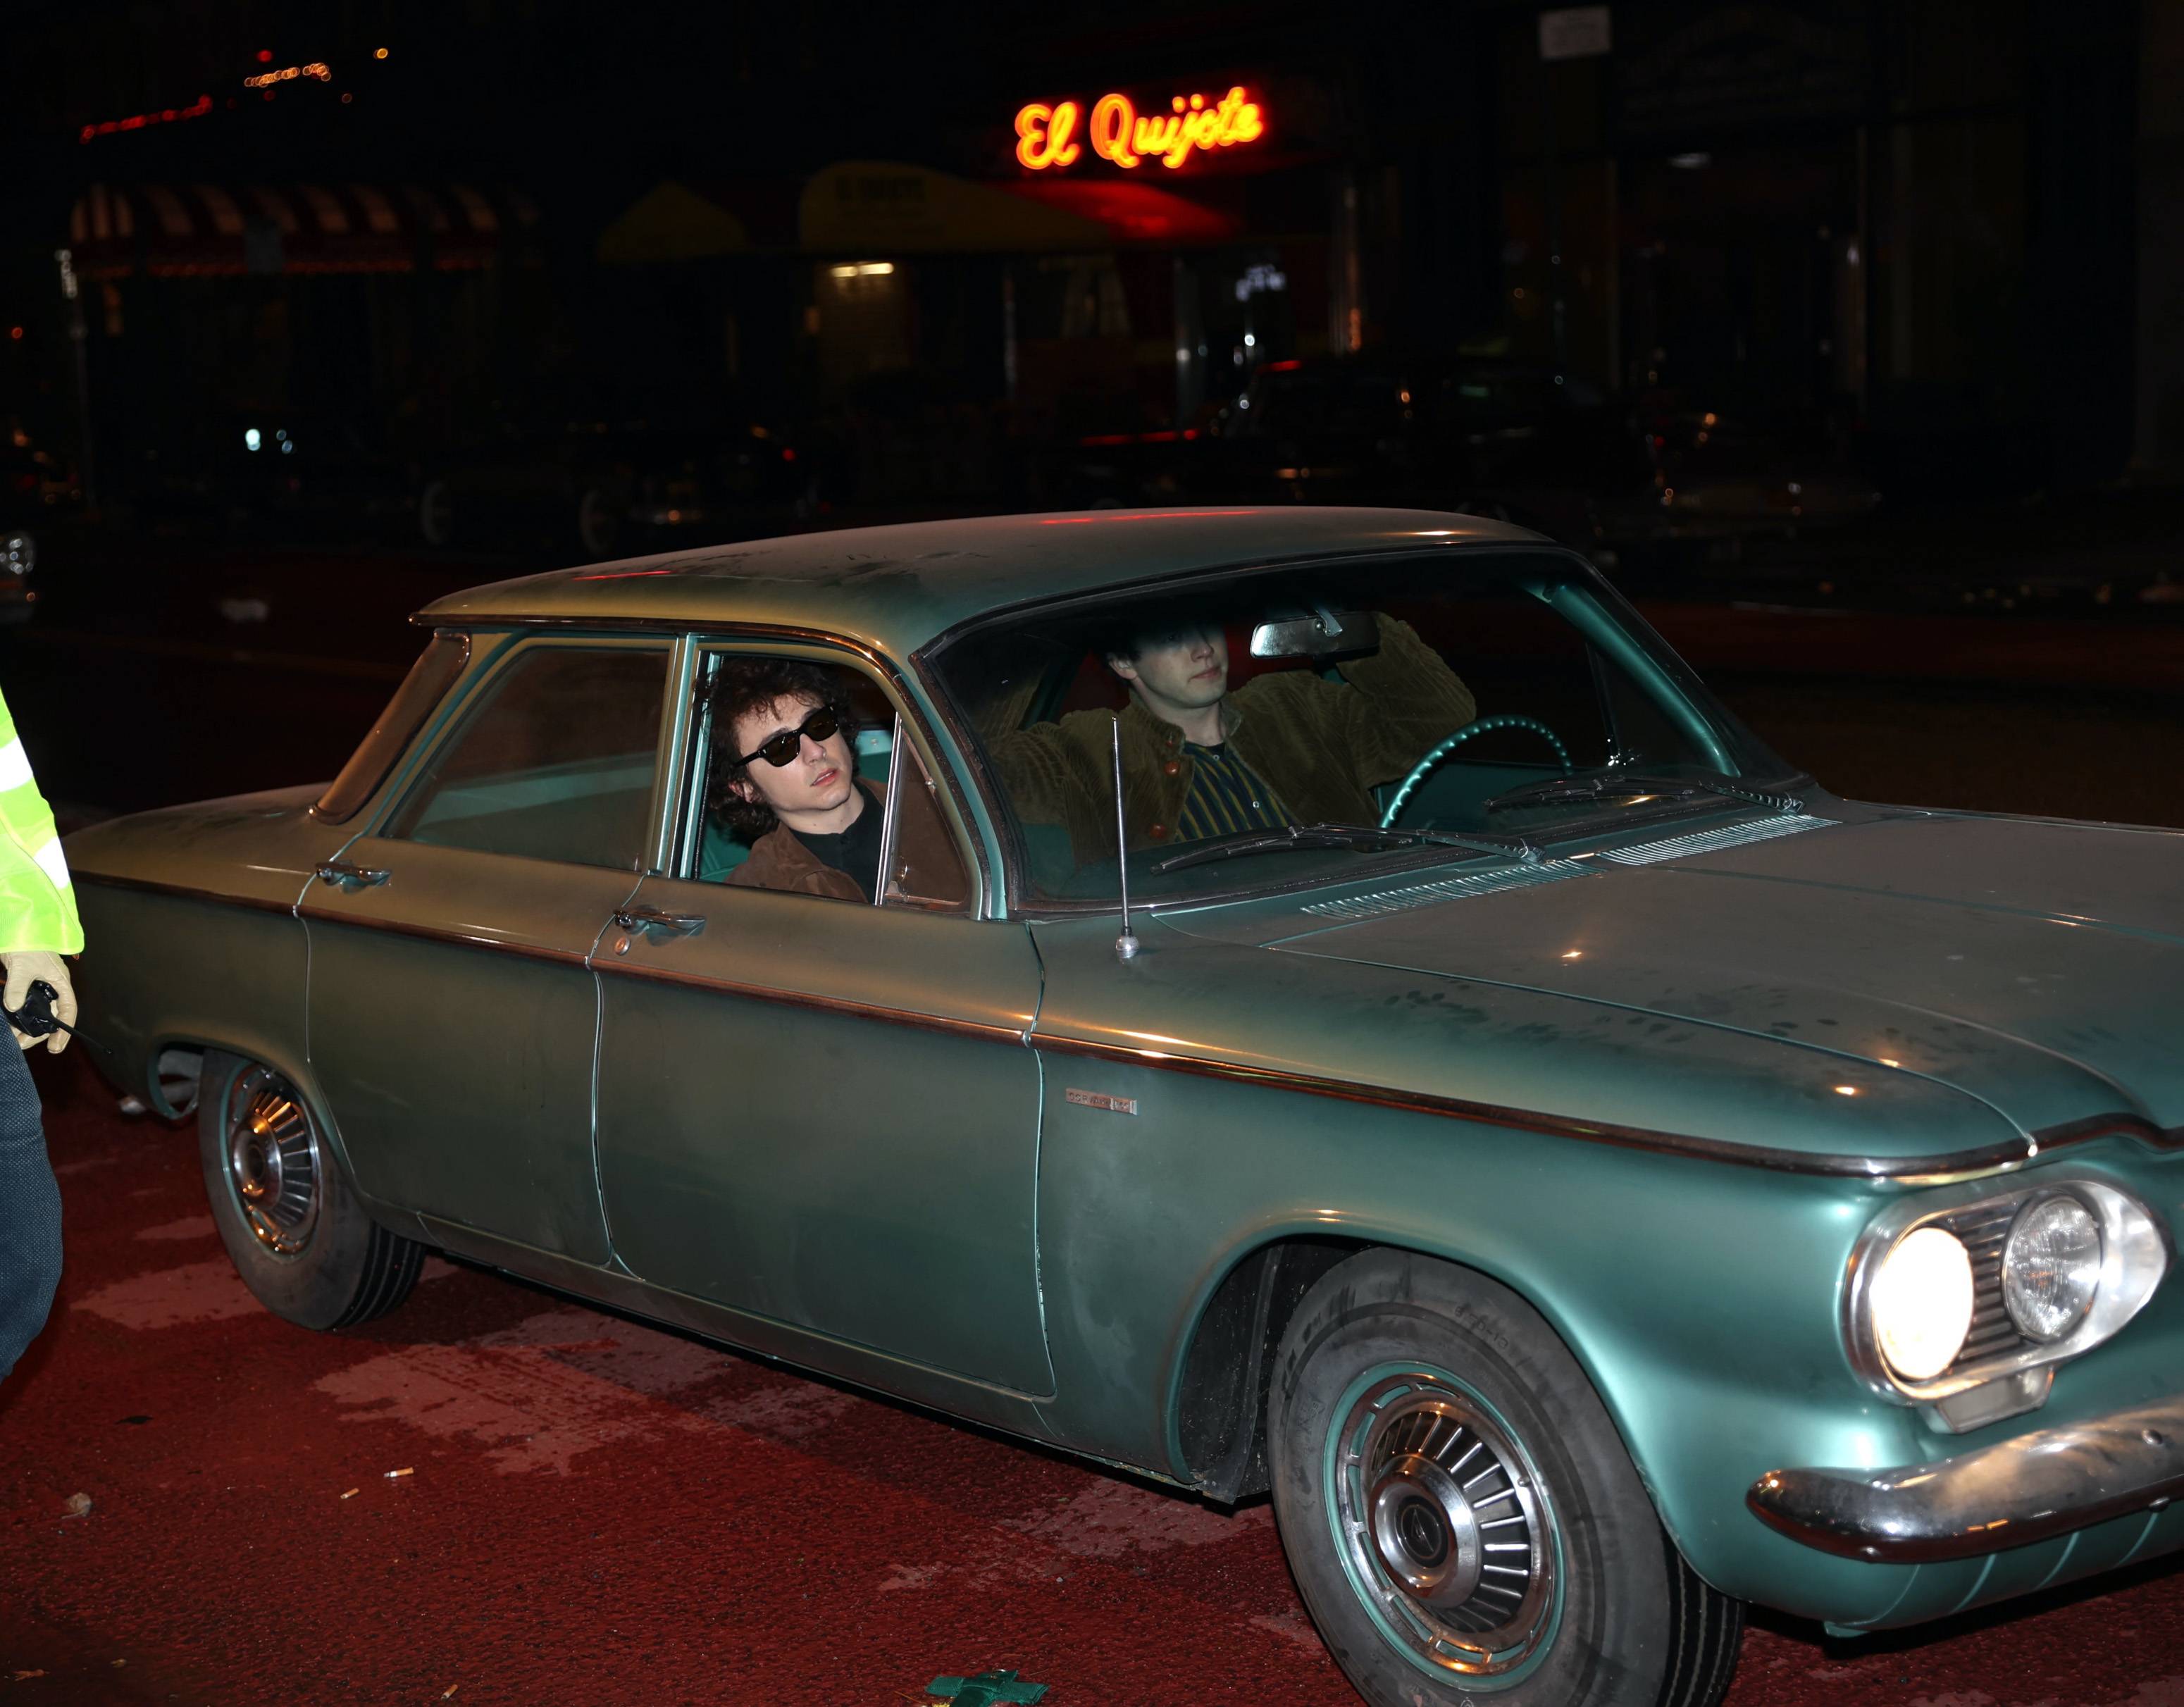 Timmy wearing sunglasses with another man sitting in an old car at night with a neon sign in the background